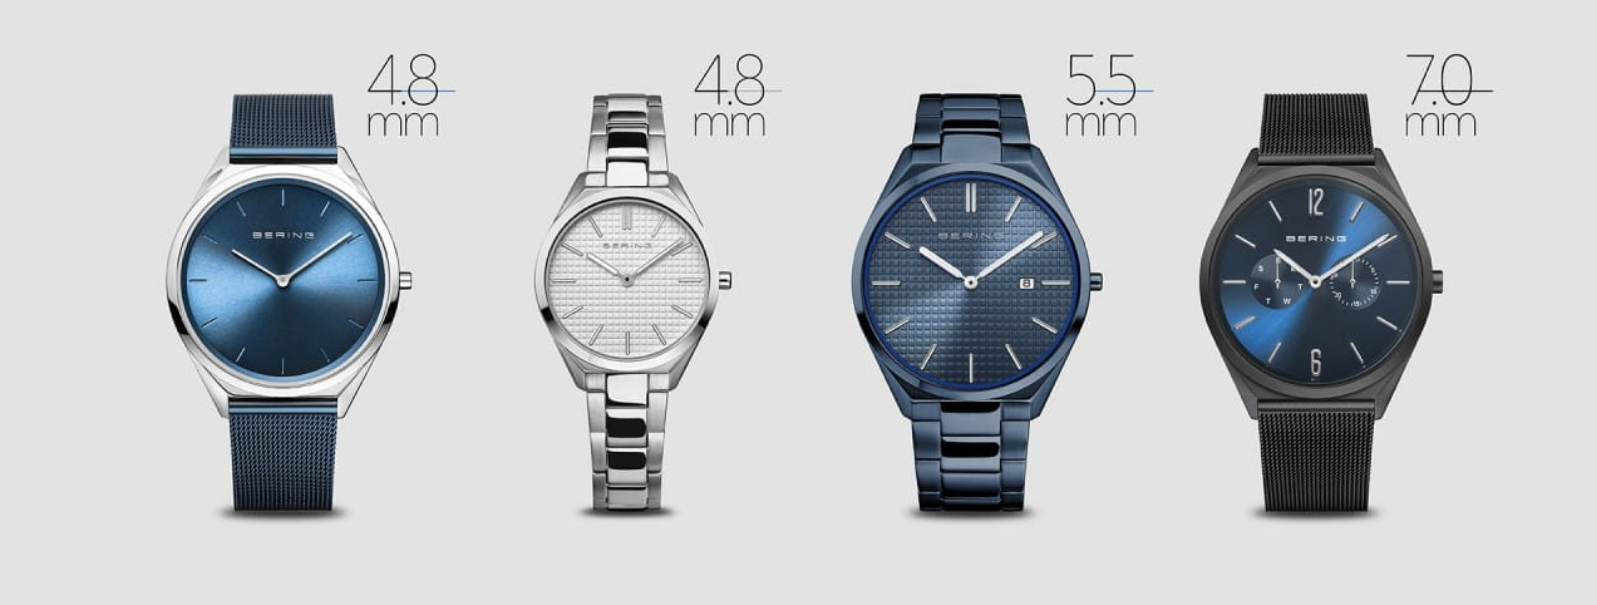 Bering's Ultra-Slim Collection